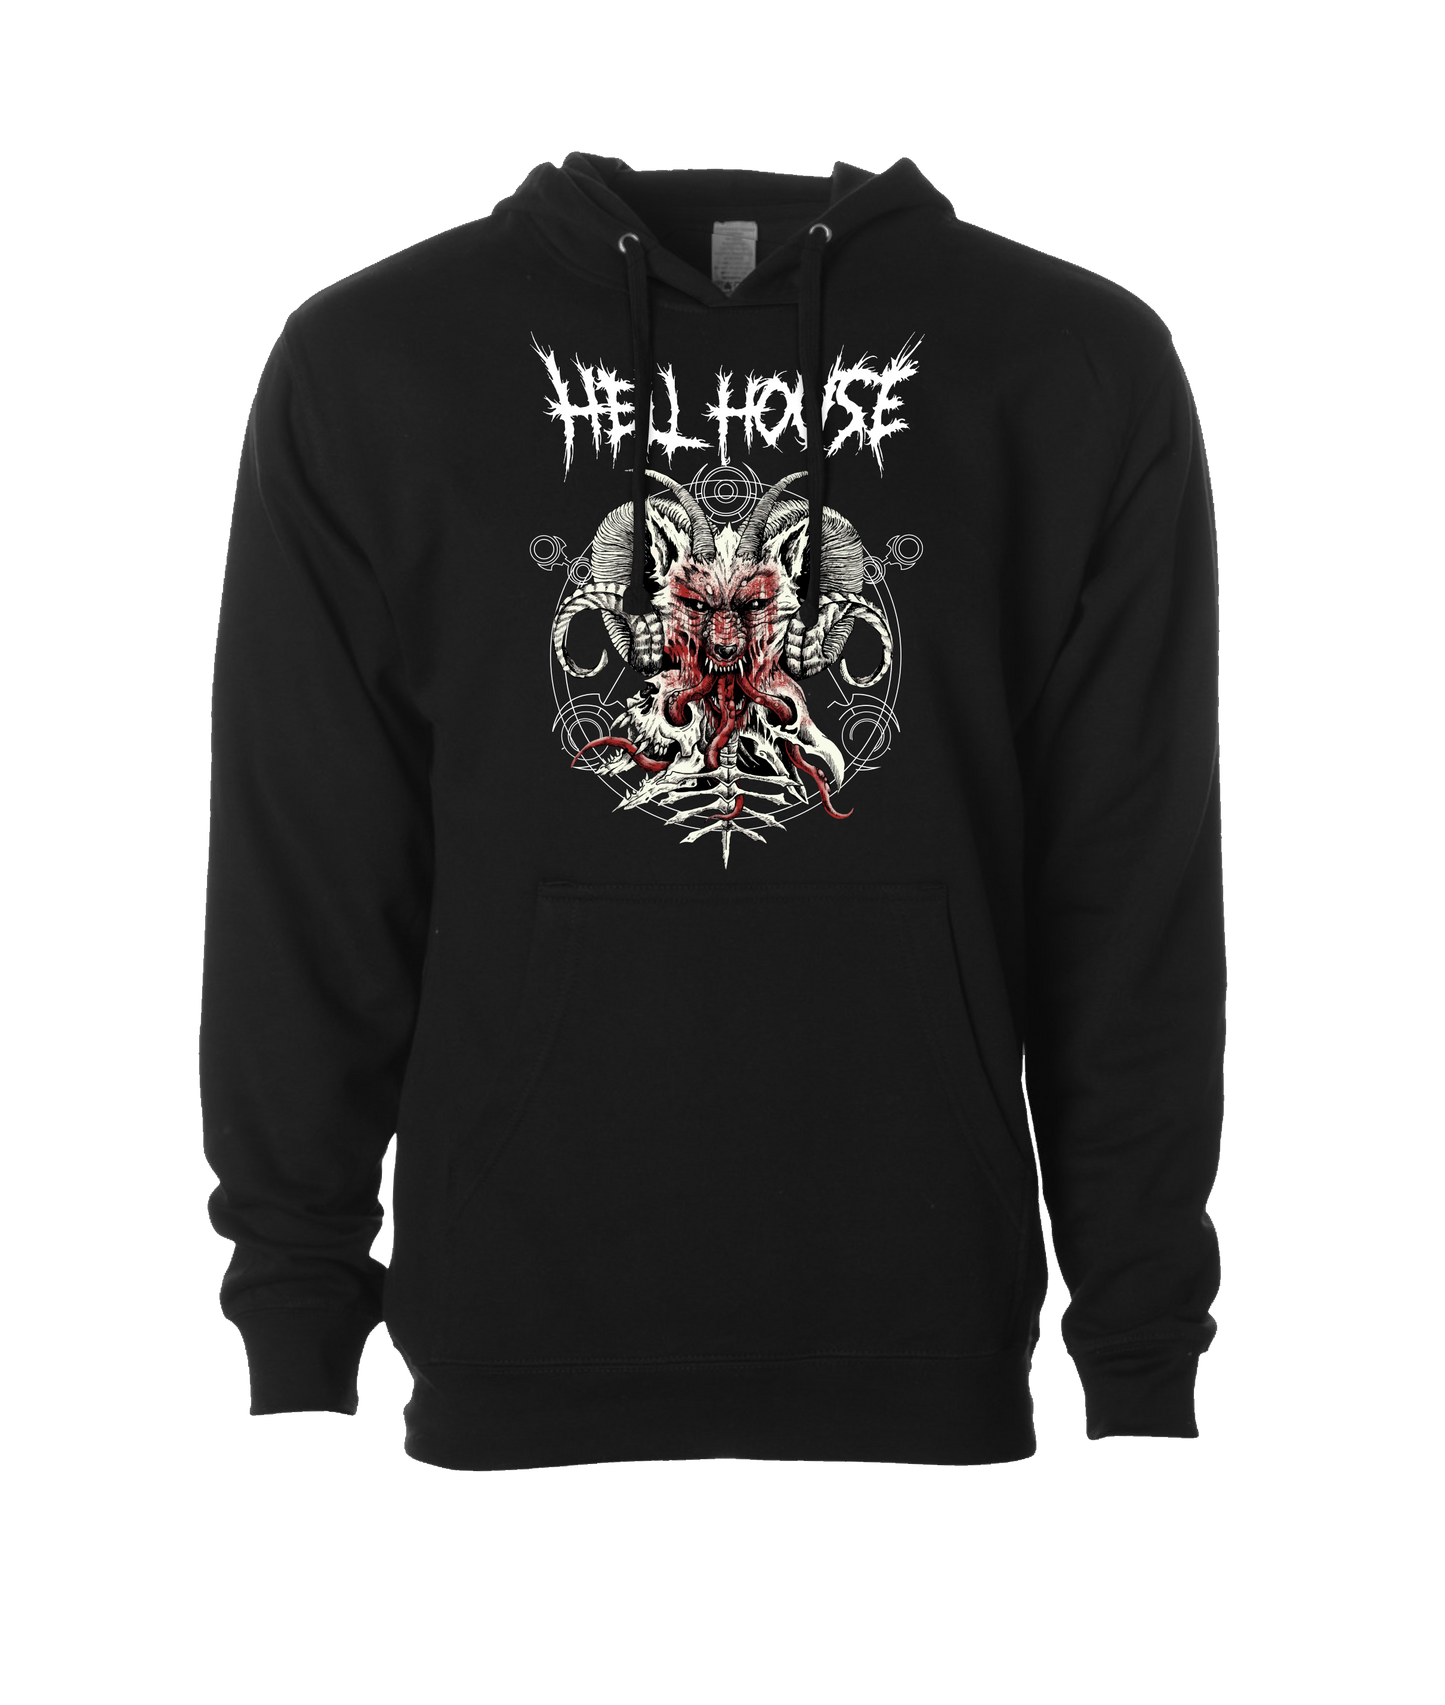 Hellhouse crypt - WOLFHORN - Black Hoodie